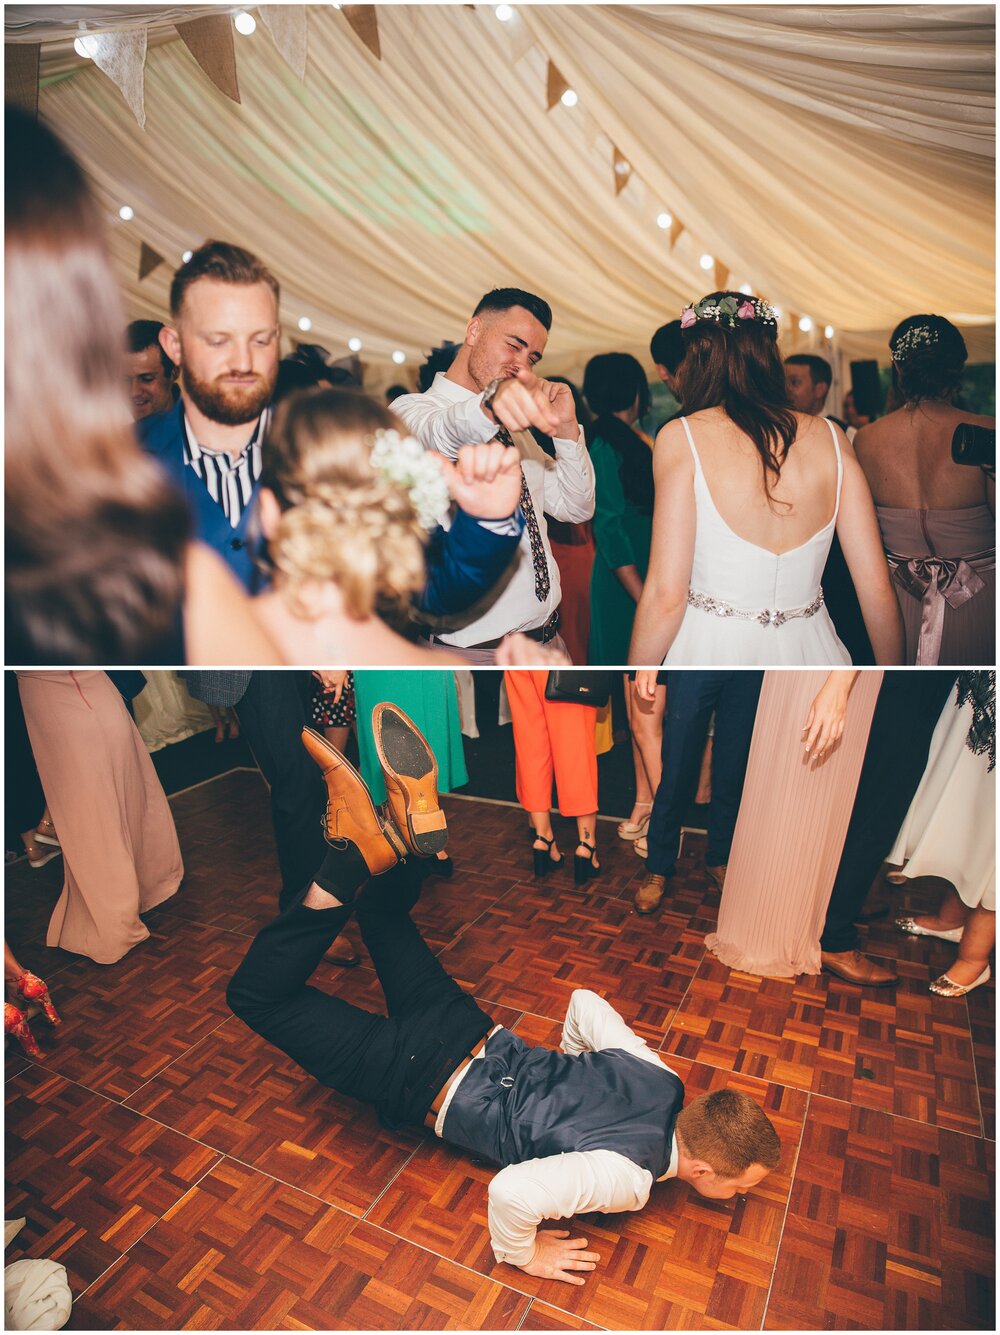 Wedding guests dance during the evening reception at festival-themed wedding in Cheshire.